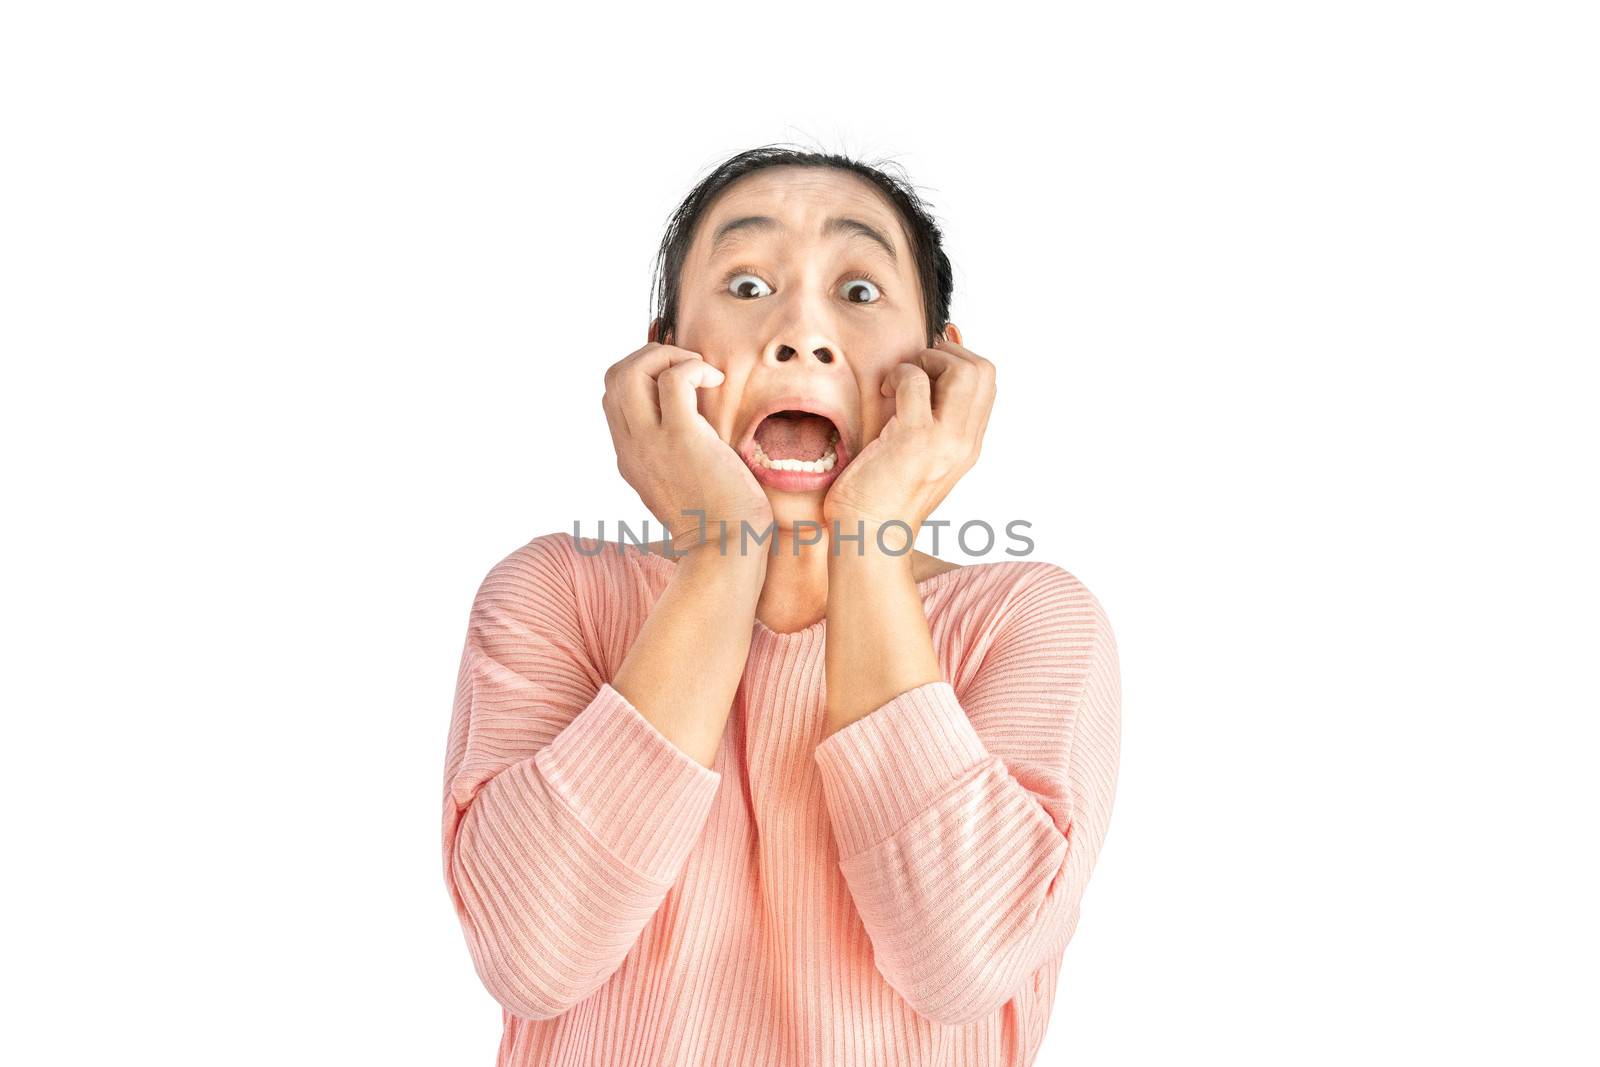 Shocked and frightened face of young Asian woman wear pink t-shirt, Isolated on white background.